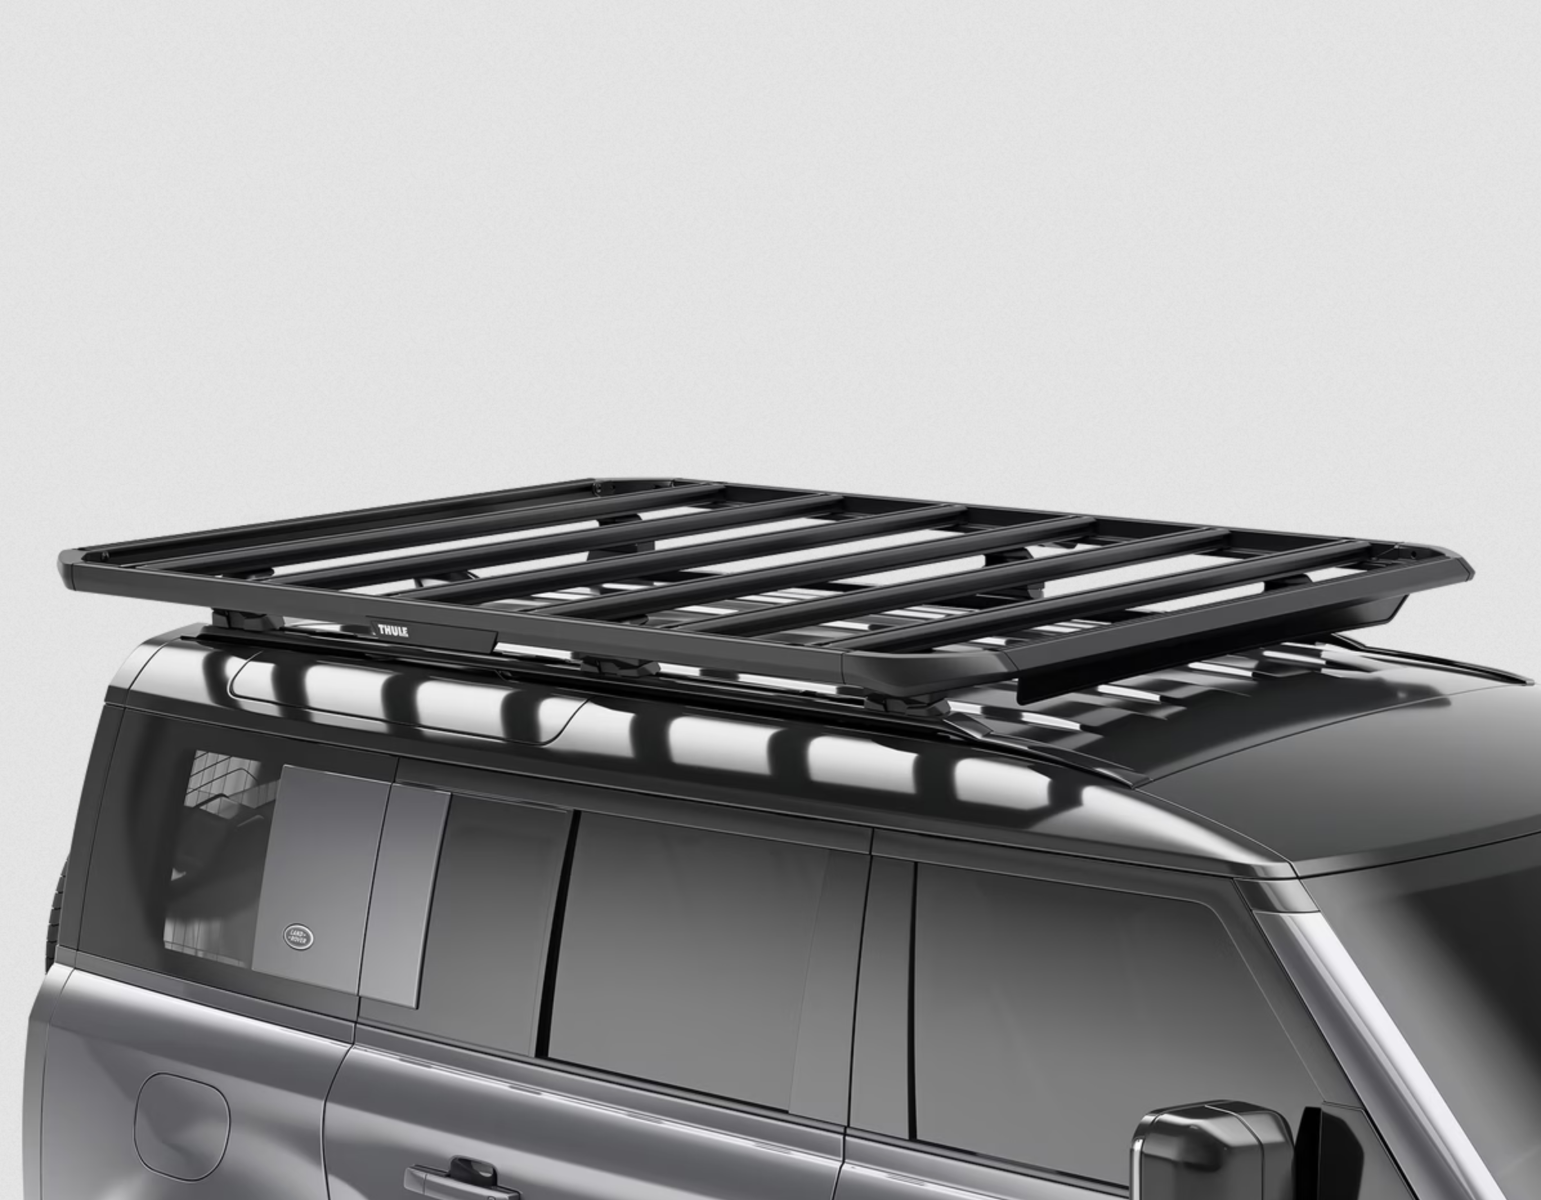 Thule Caprock Platform (1500 x 1500mm) for Hyundai i30 PD 5dr Hatch with Bare Roof (2017 to 2020) - Factory Point Mount